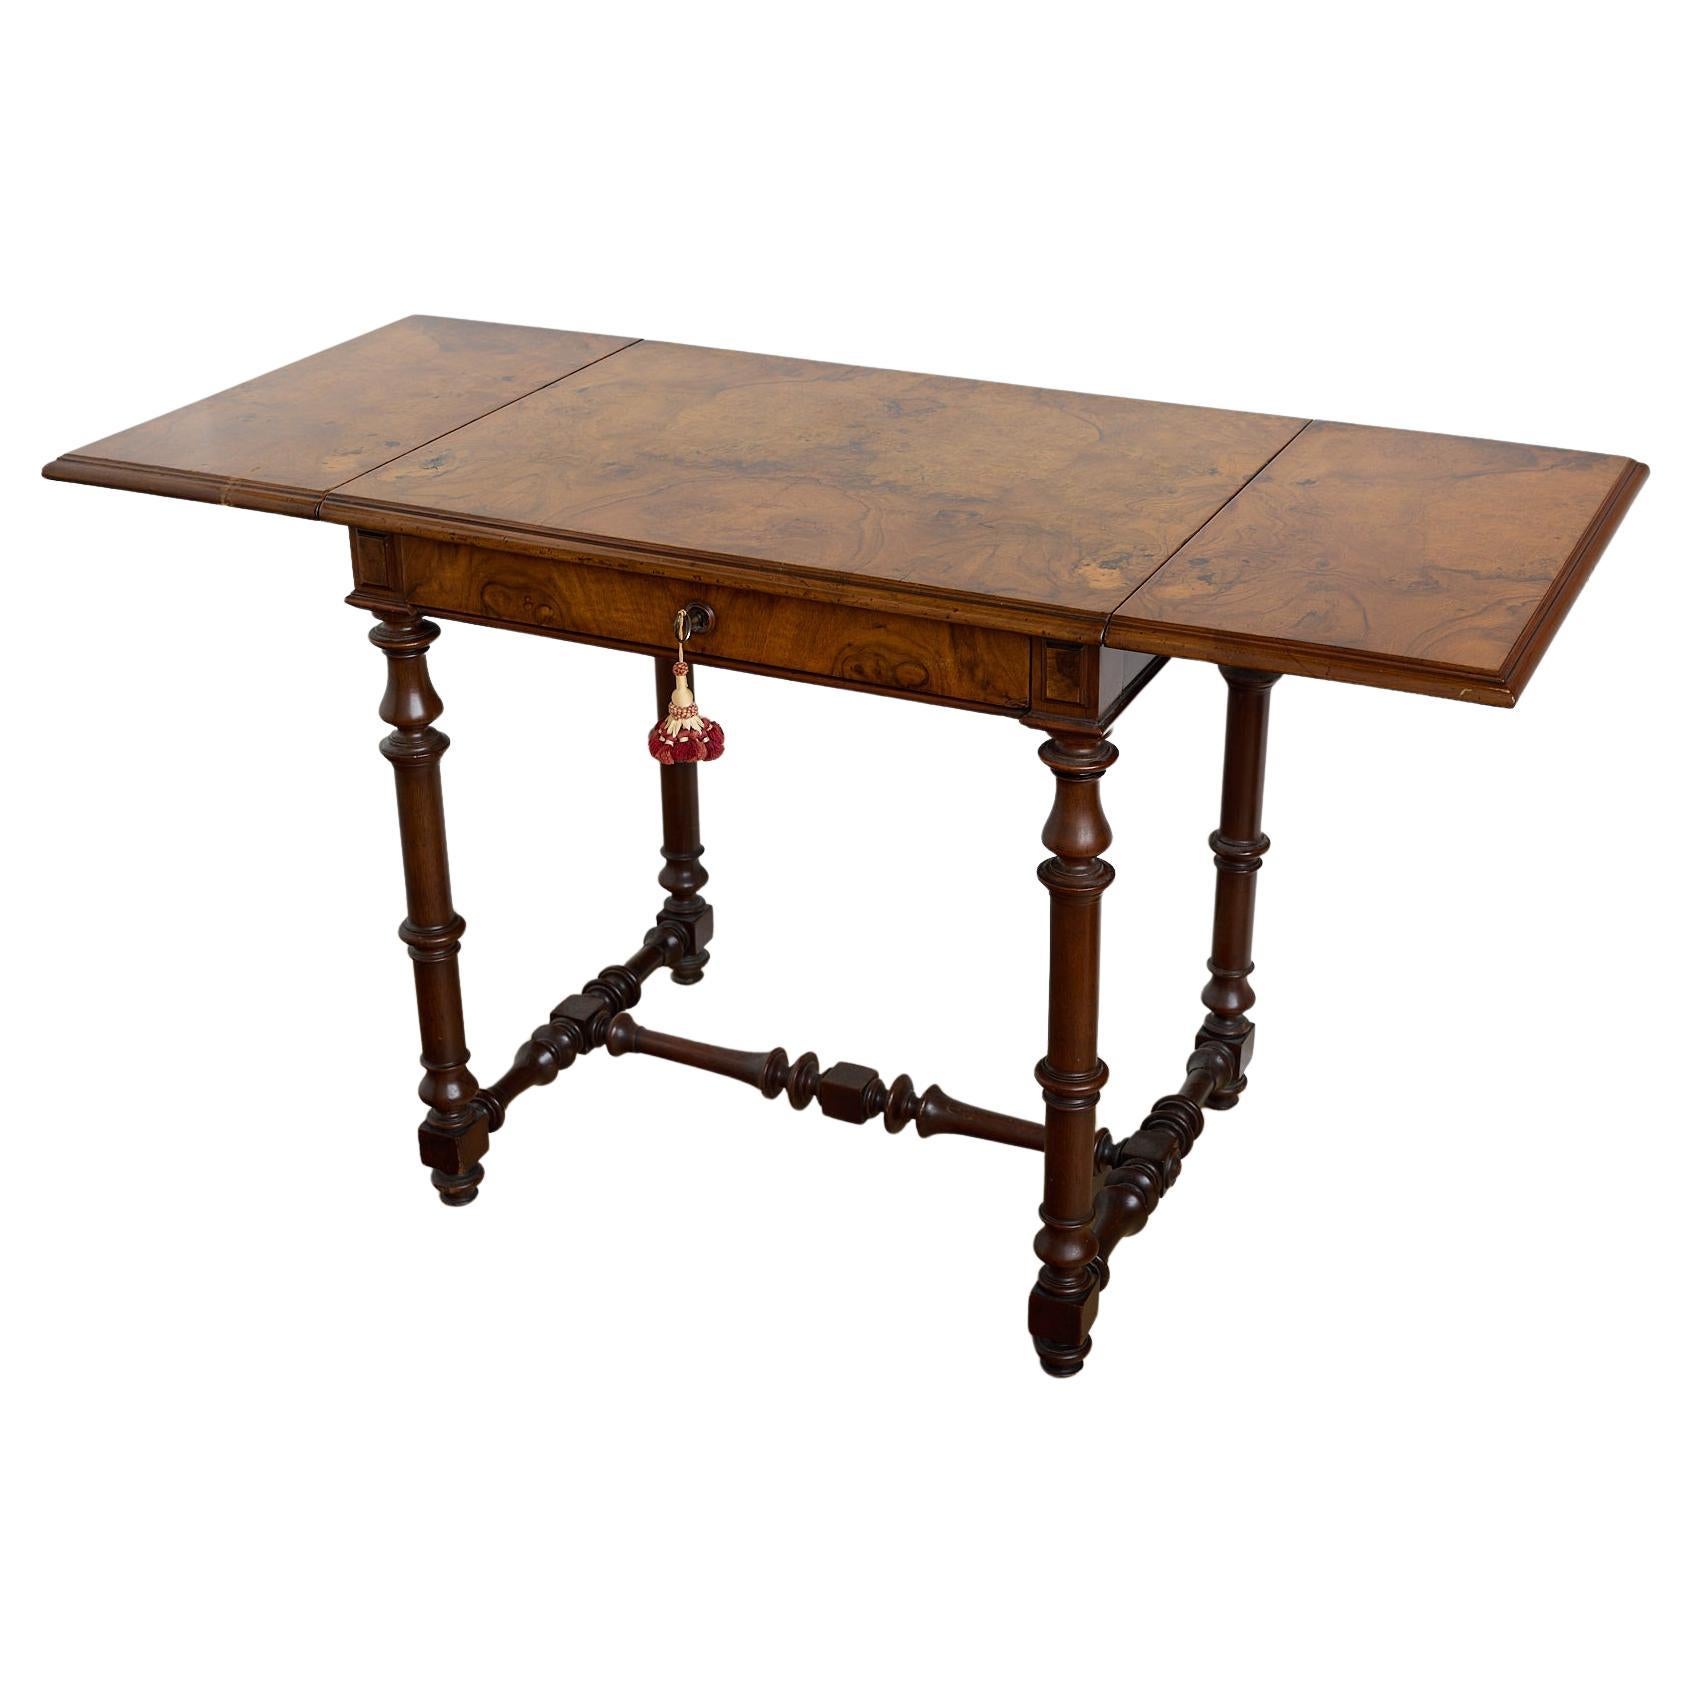  Burled Walnut Console Table with Two Drop Leaves